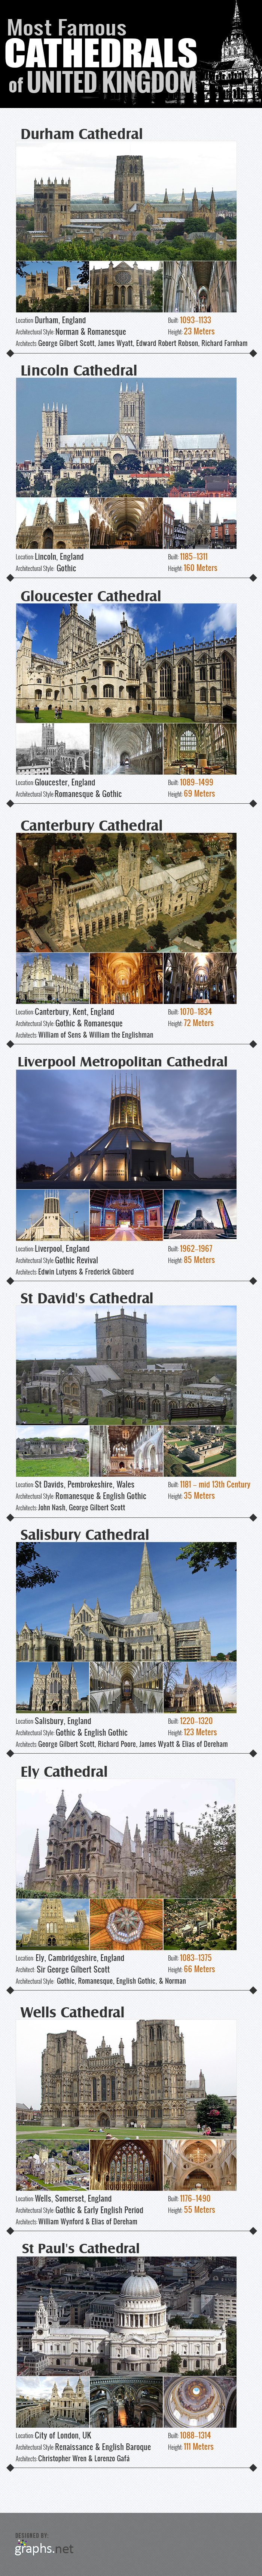 Most Famous Cathedrals of United Kingdom